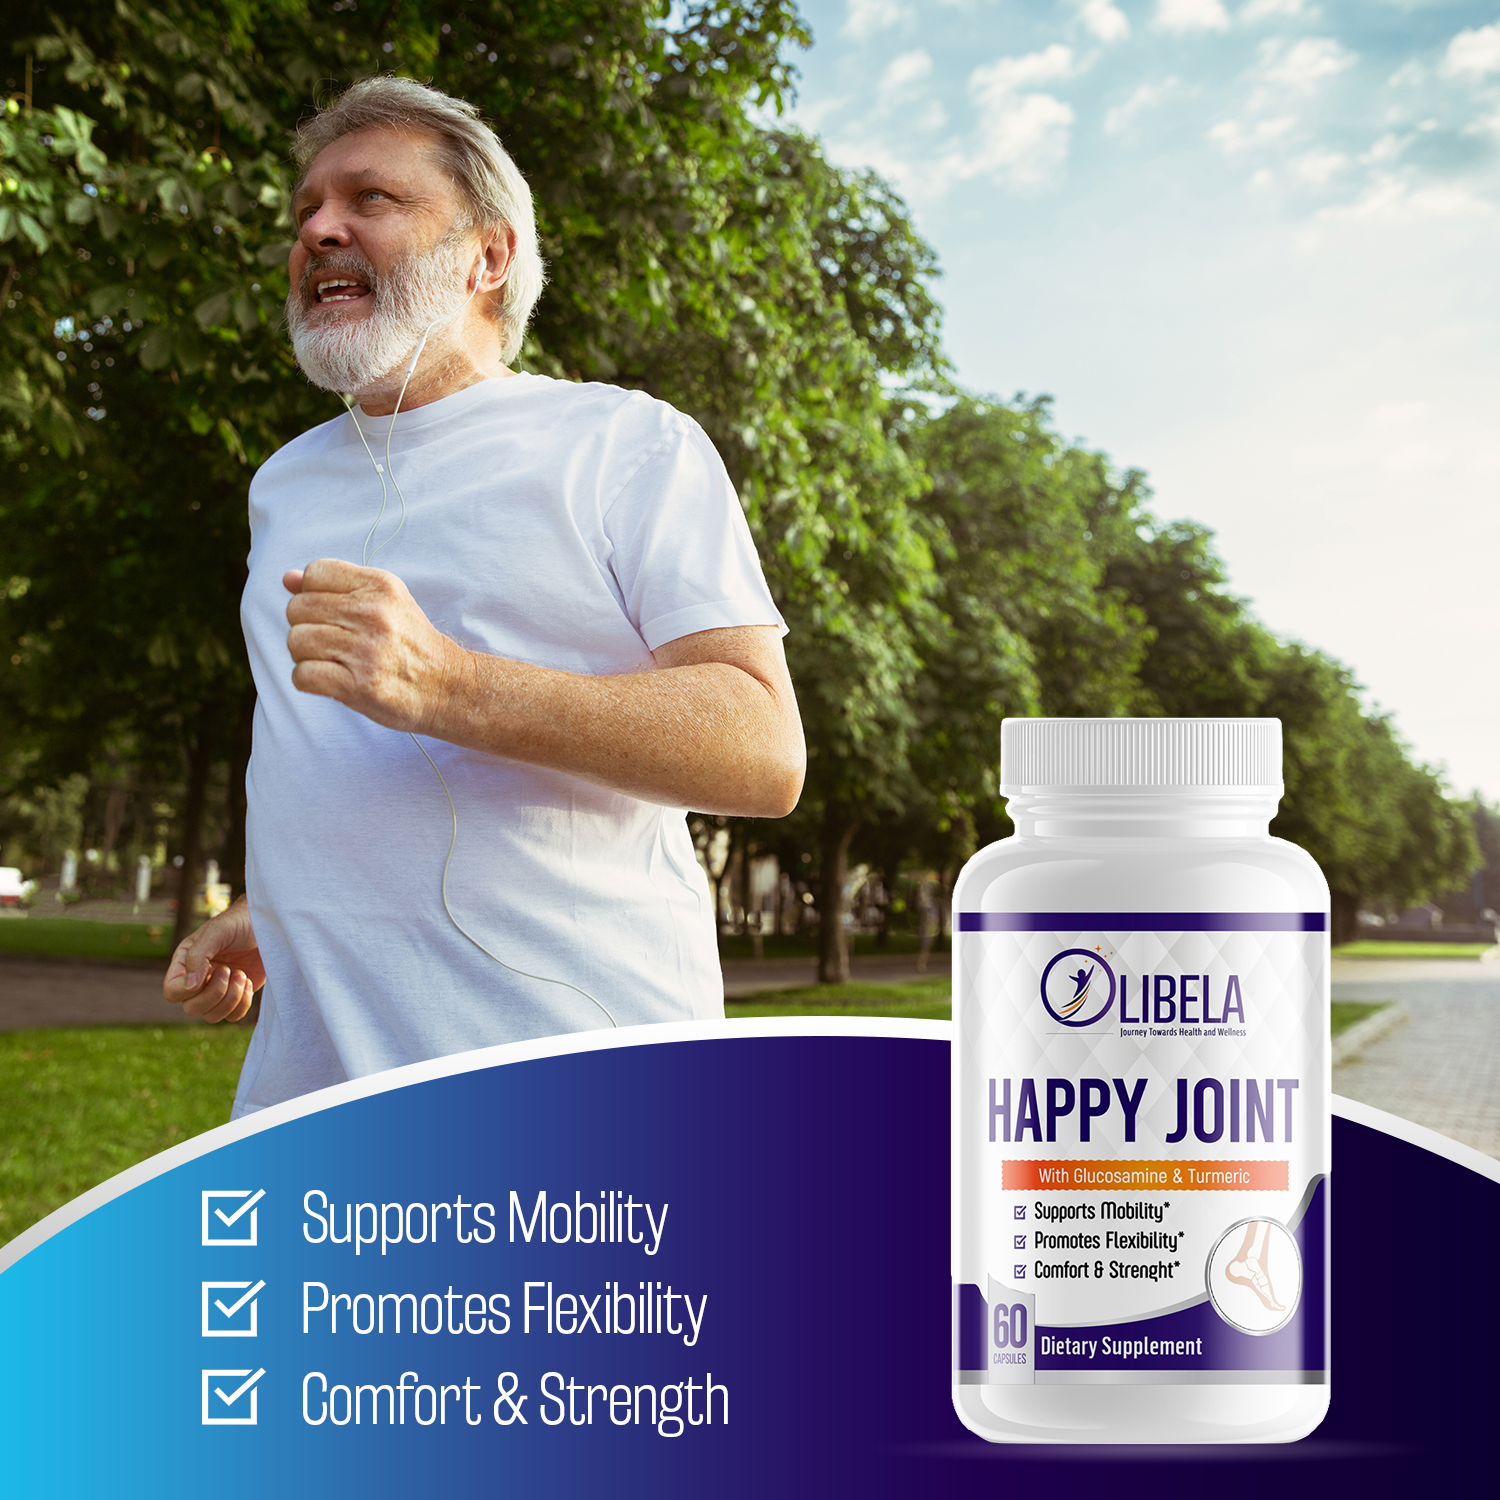 Happy Joint - Supports Healthy Joints, Reduce Inflammation, Reduce Allergies, Reduce Joint Pain, Improves Joint Flexibility, Reduce Muscle Damage From Exercise, And Increase Exercise Performance, 60 Caps.